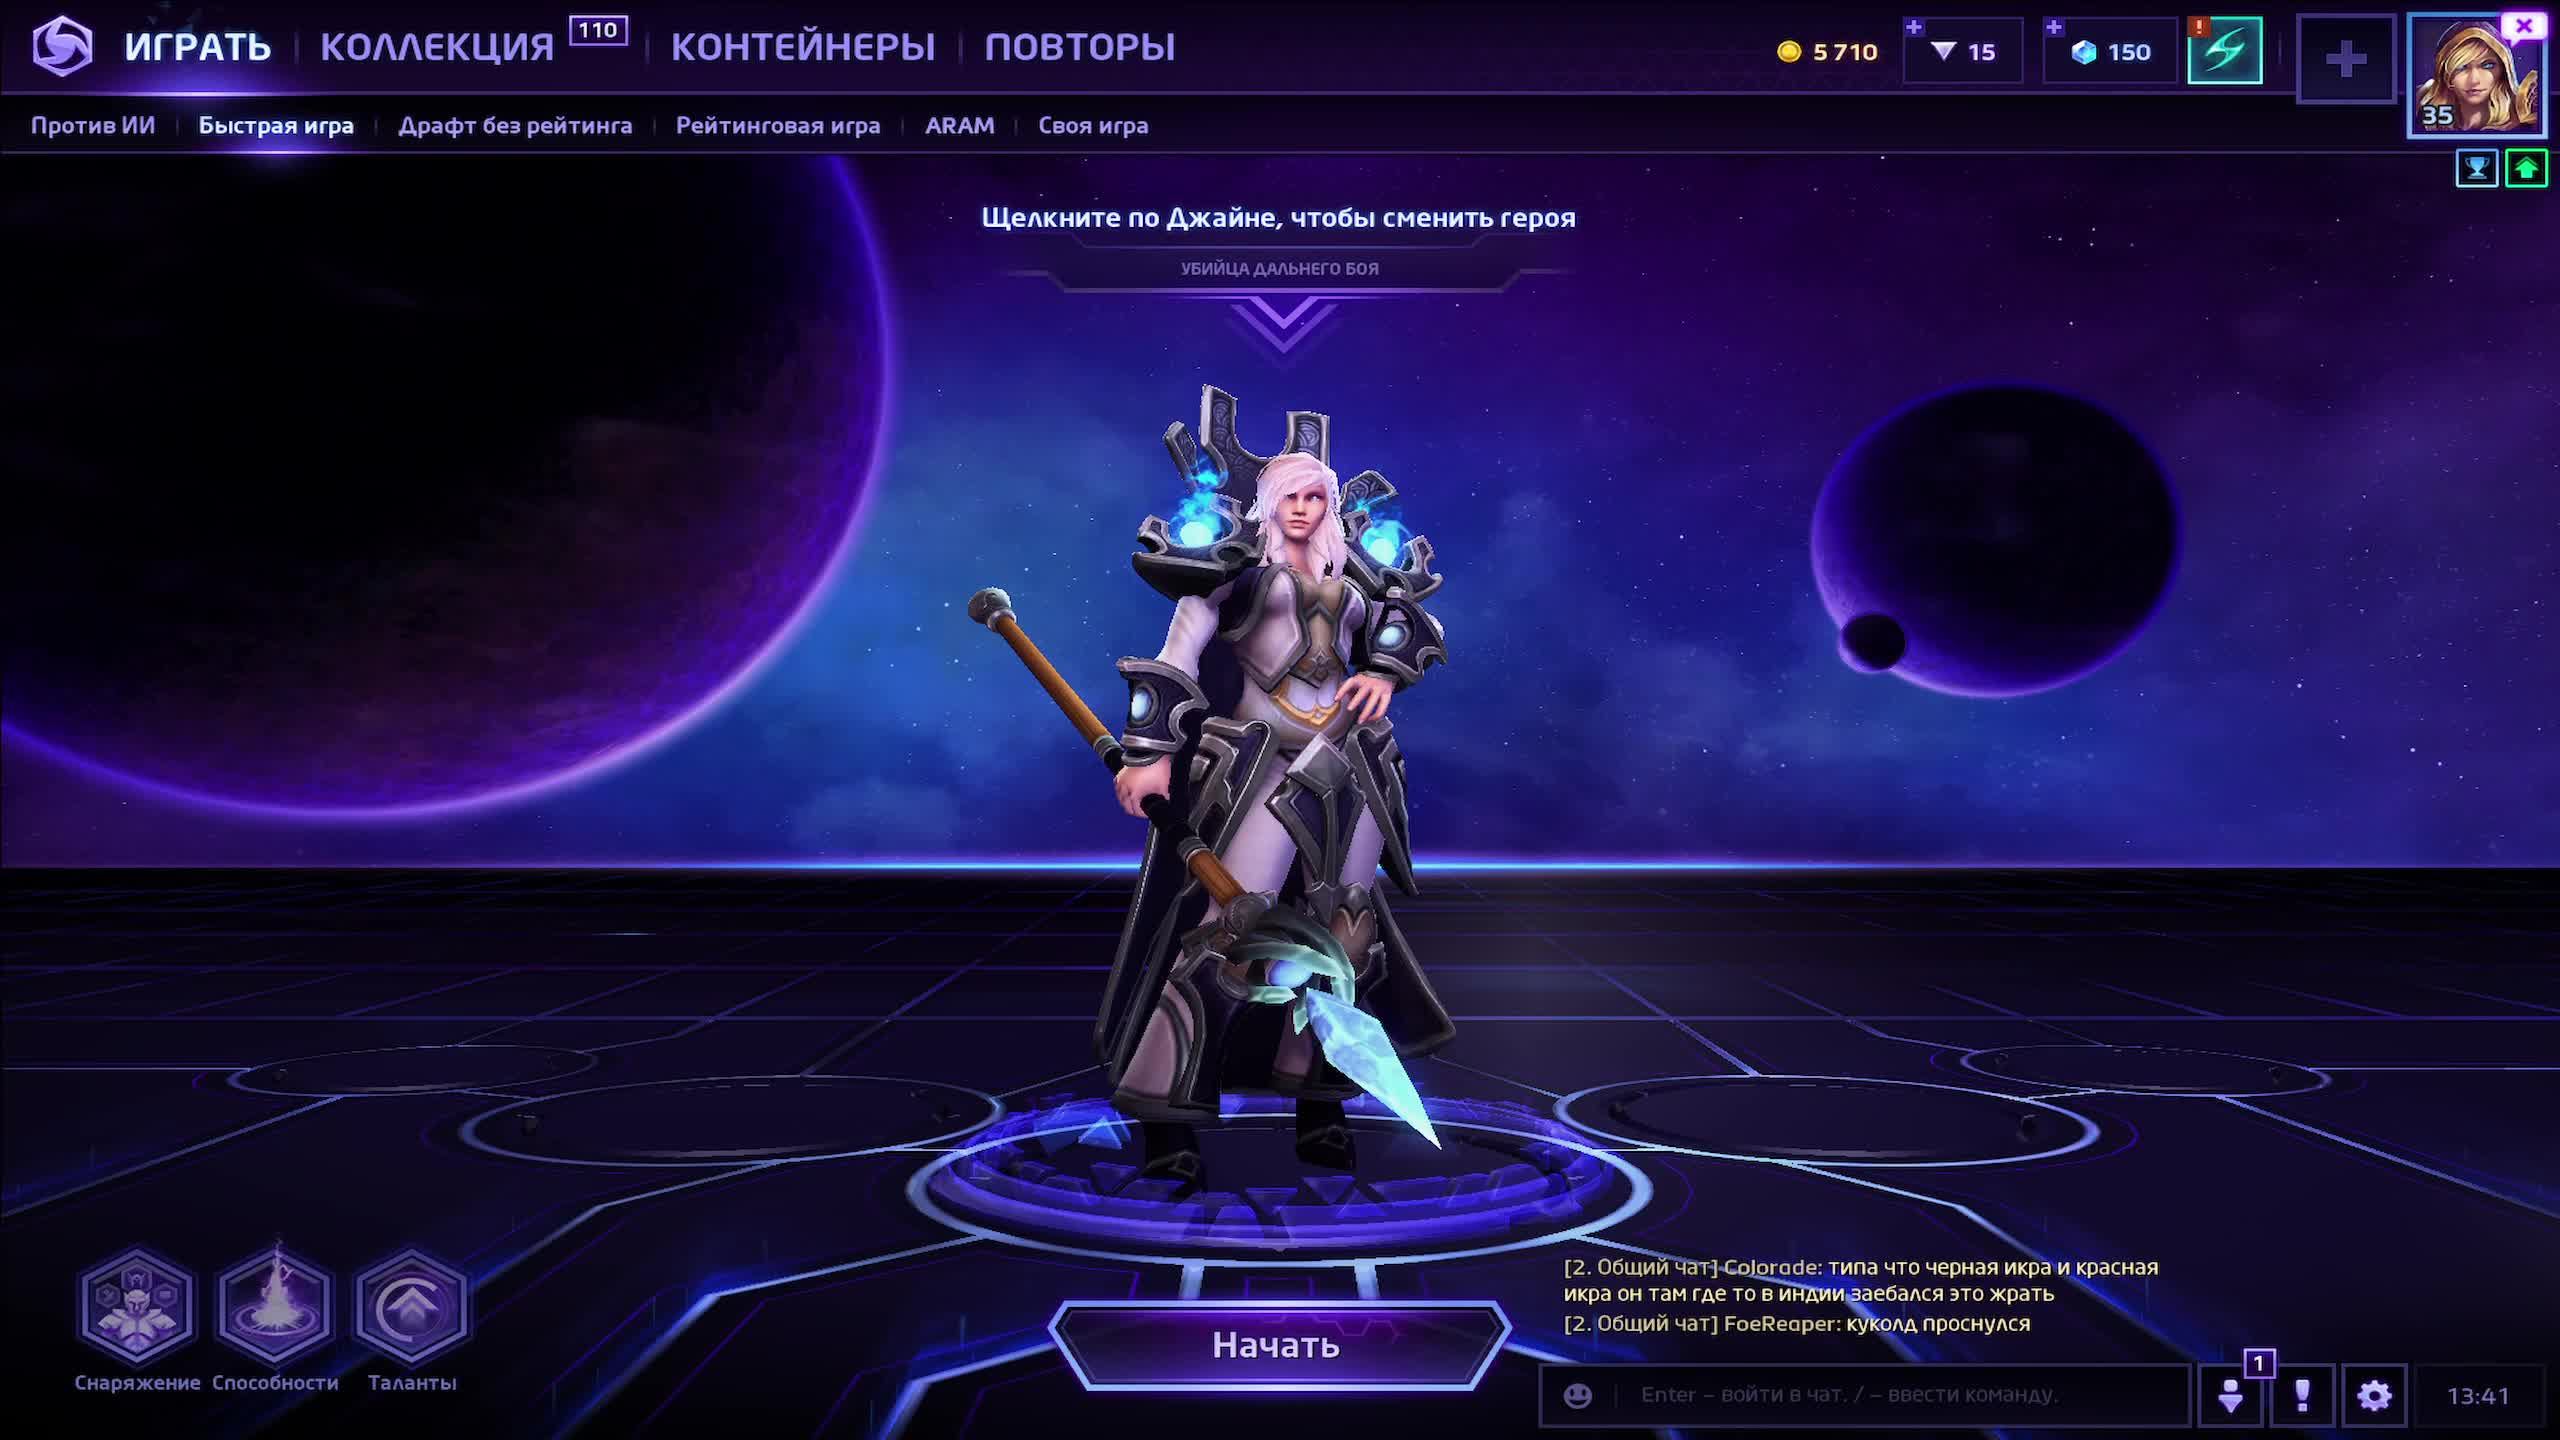 Heroes of the Storm! :